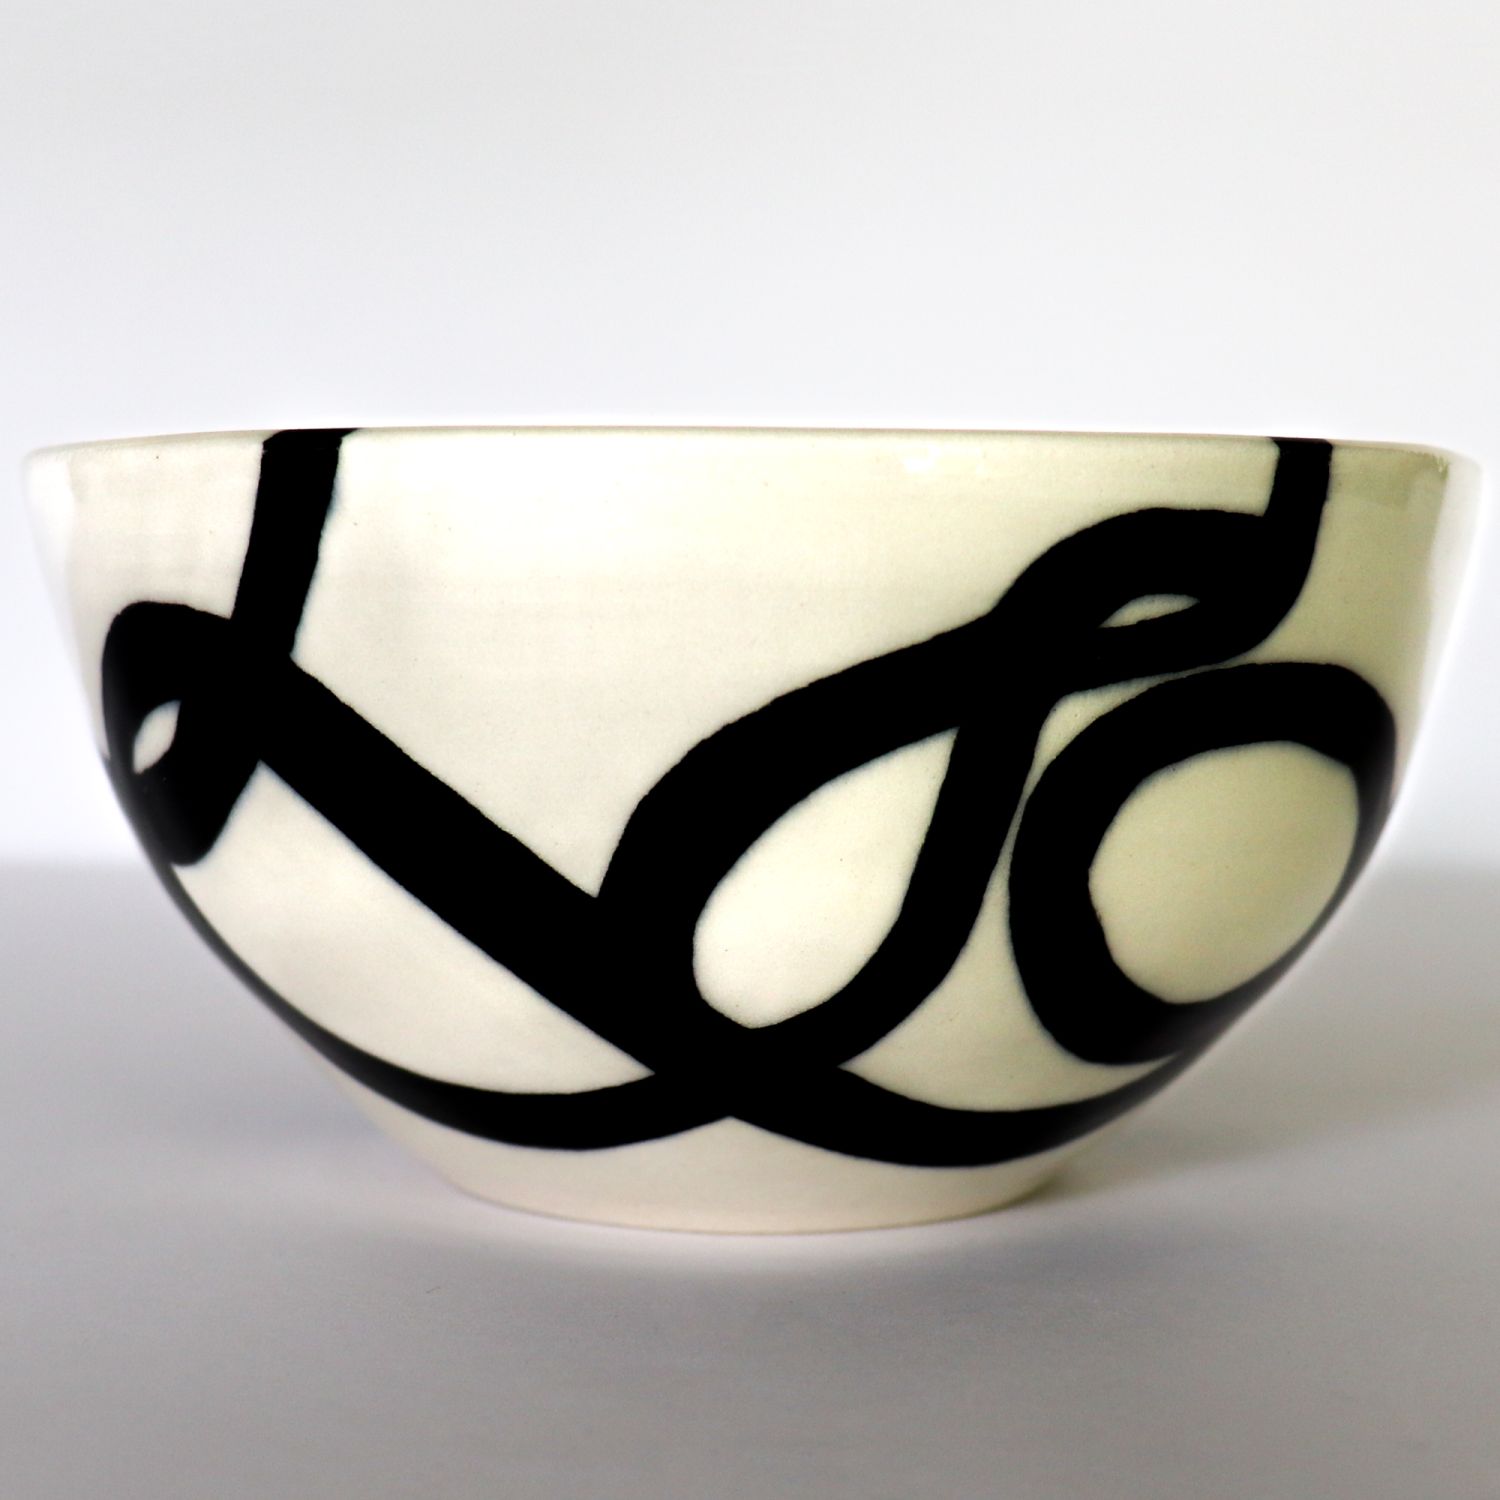 Alana Marcoccia: Interconnected Bowl – Small Product Image 2 of 5